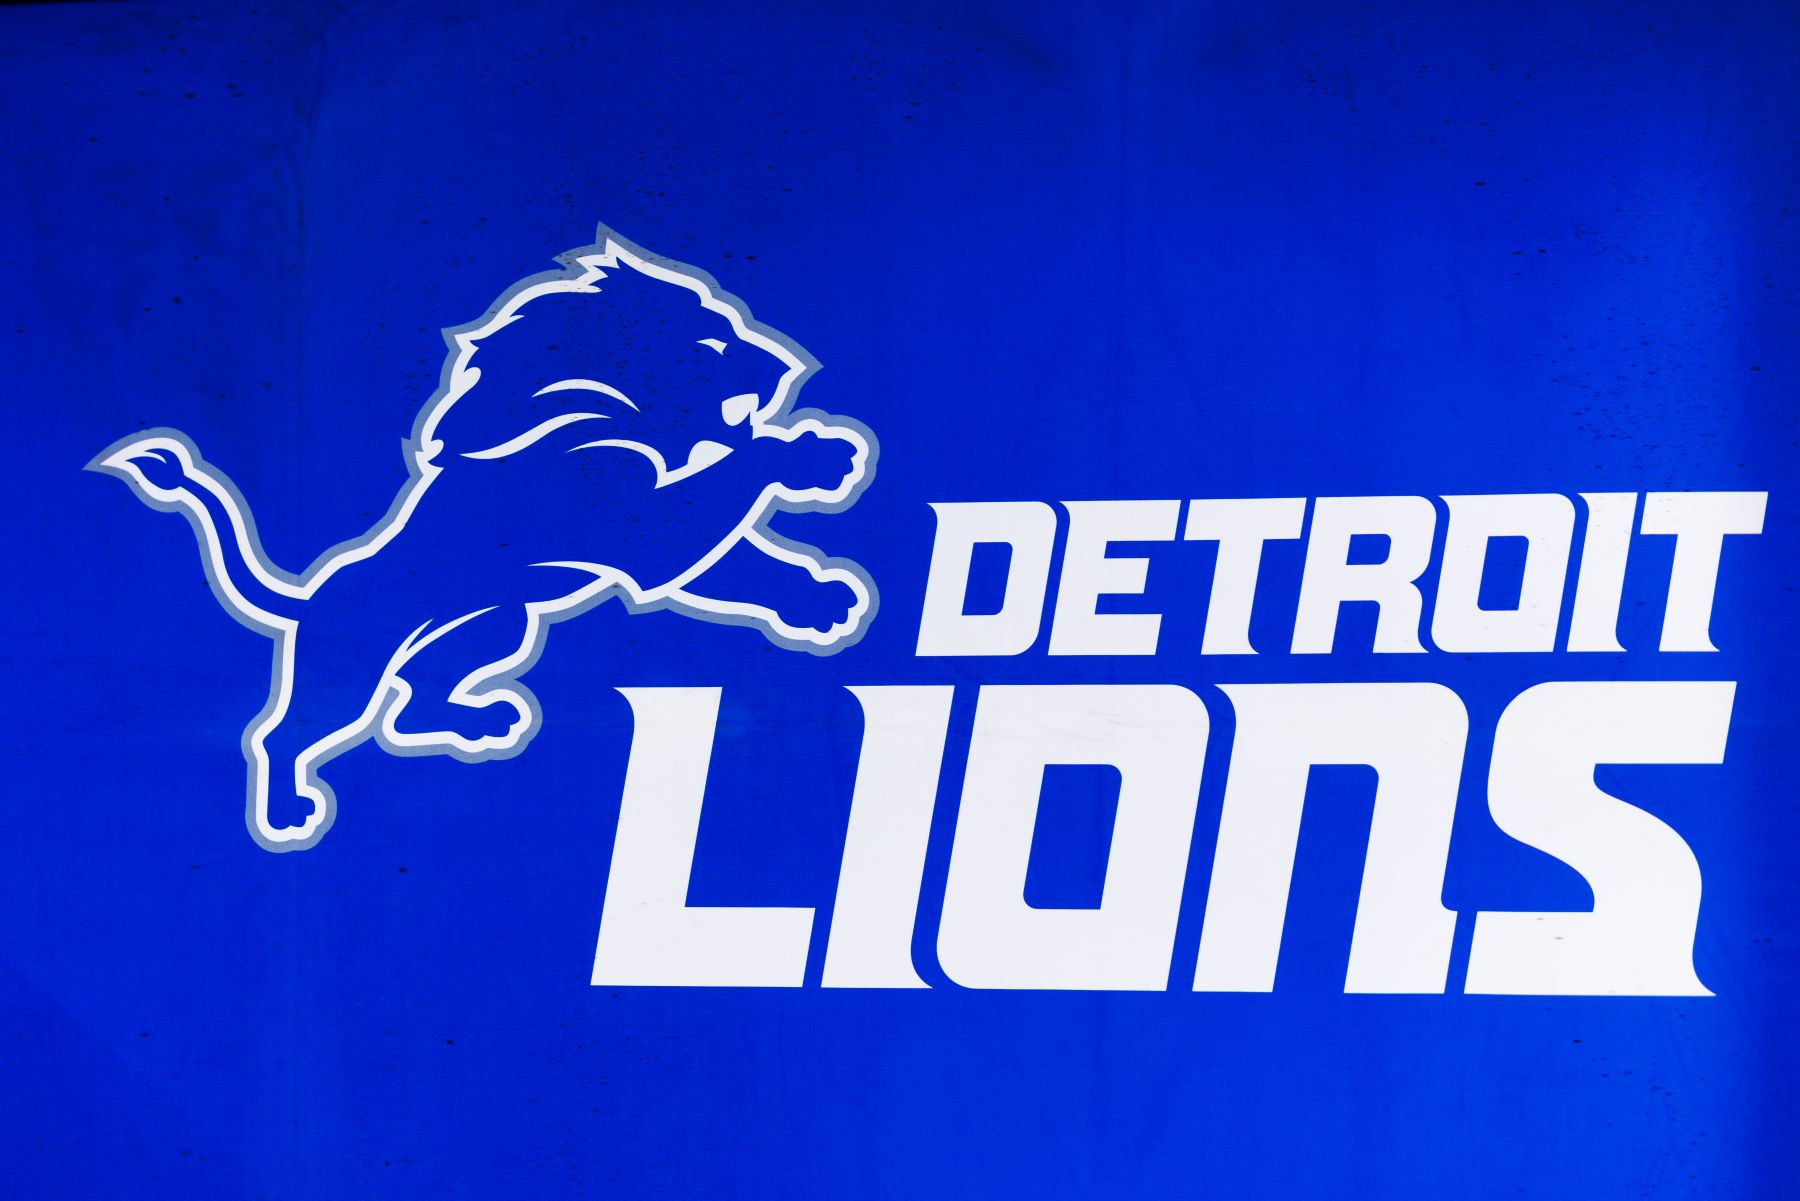 NFL team Detroit Lions logo seen at the Los Angeles Convention Center during the Super Bowl Experience